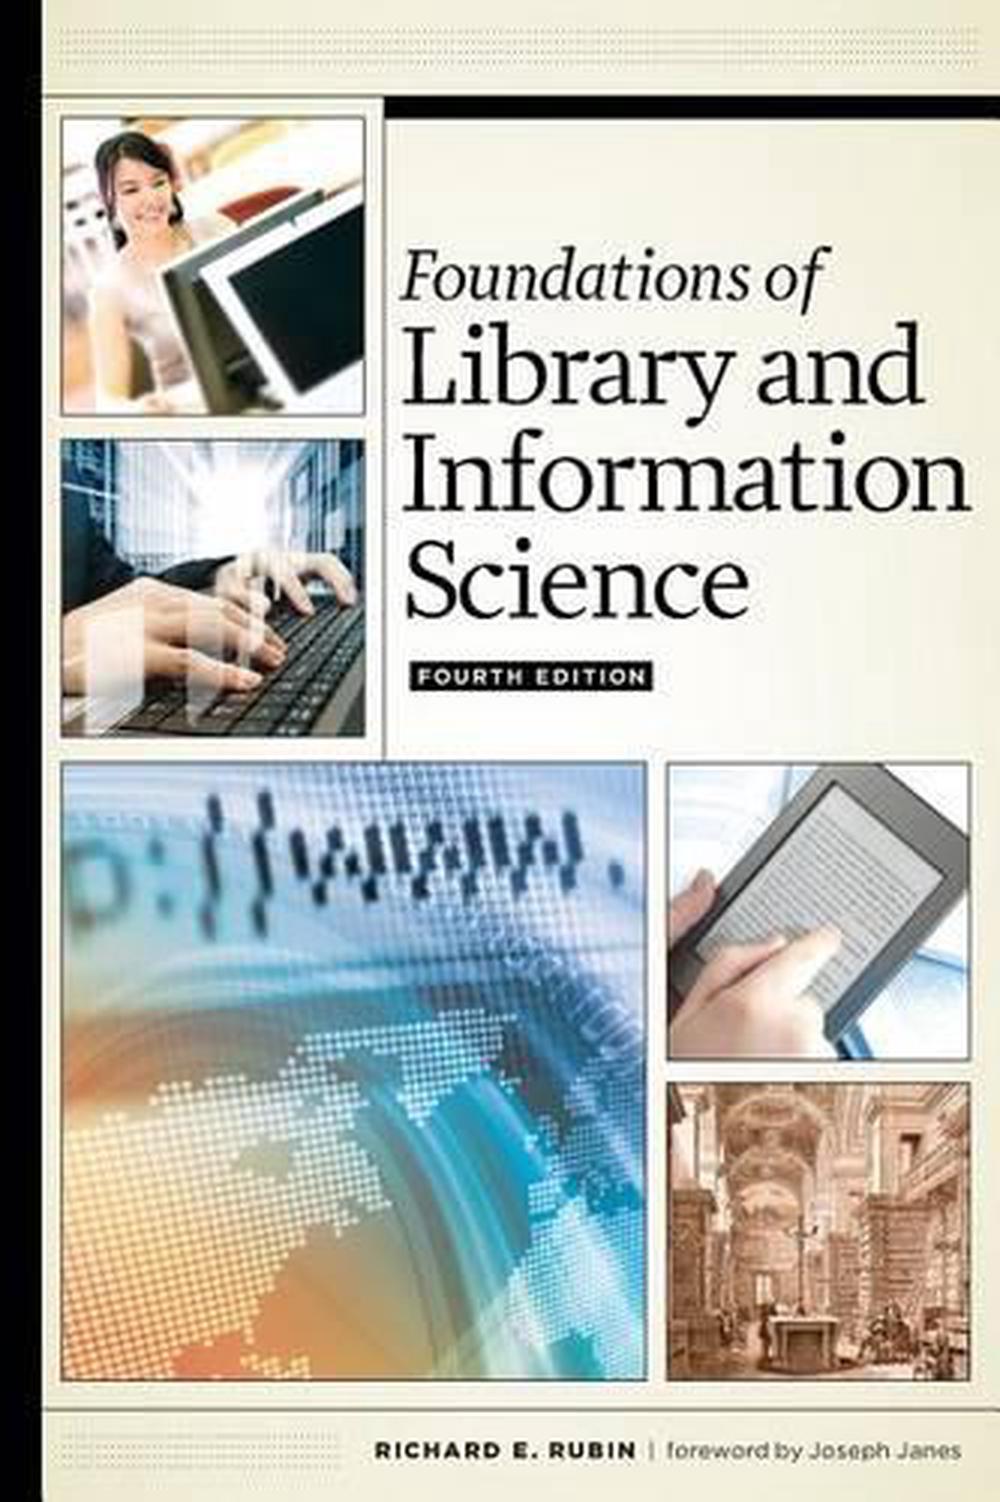 dissertation topics in library and information science